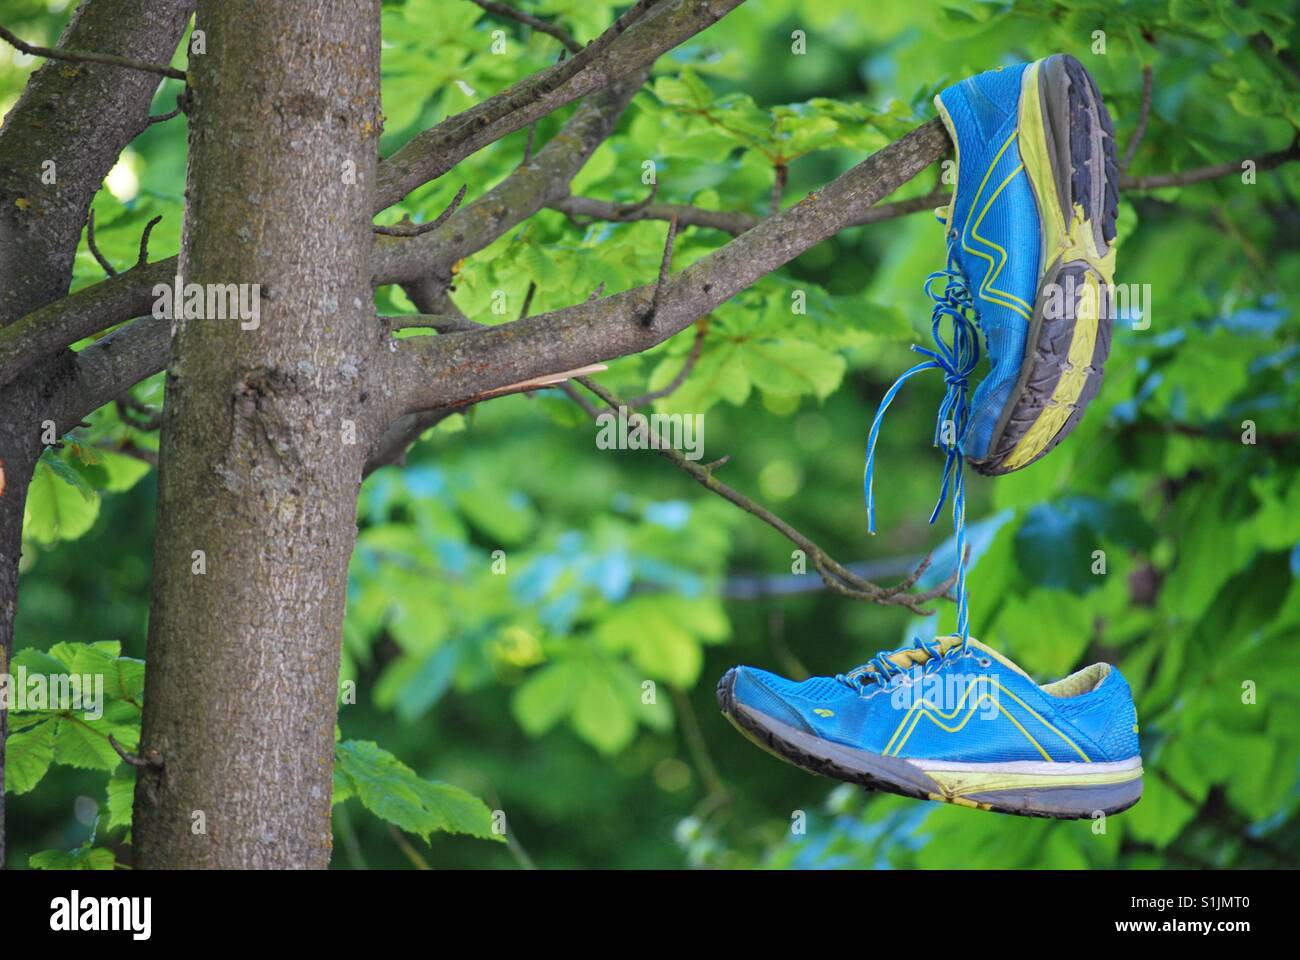 Sneakers hanging on bransch Stock Photo